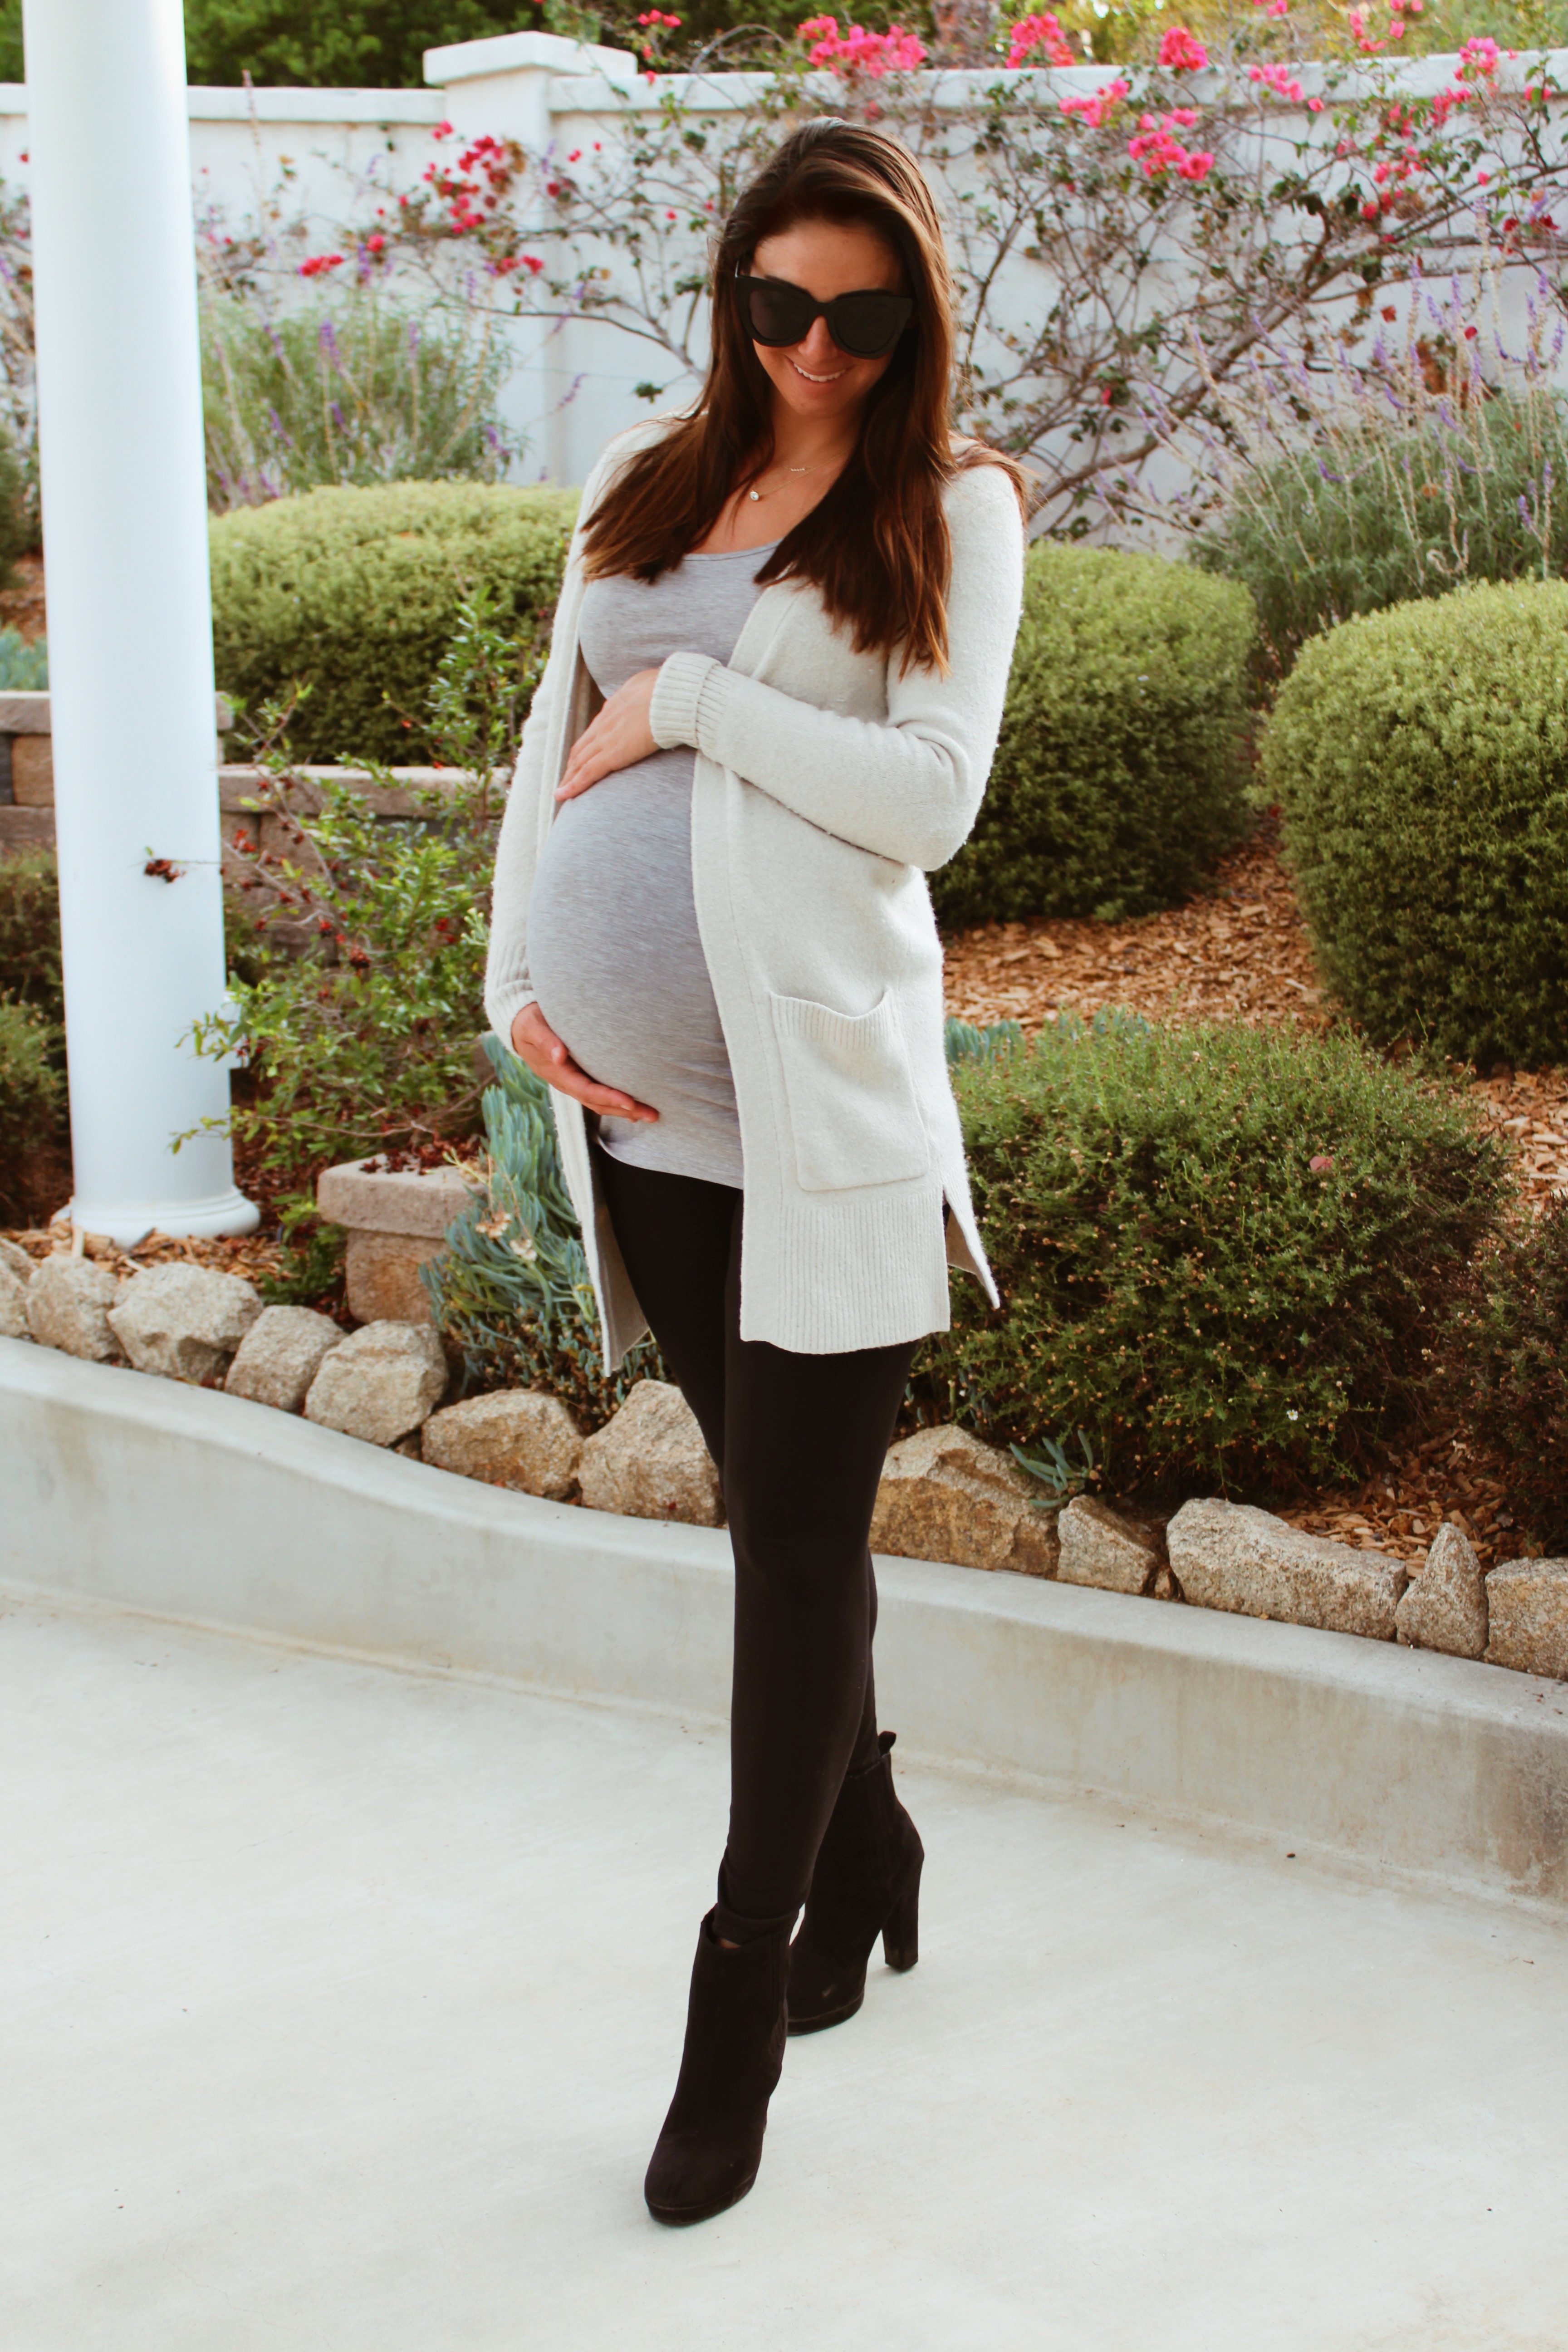 What's up Wednesday: Fall & Winter Maternity Fashion » 2Create in